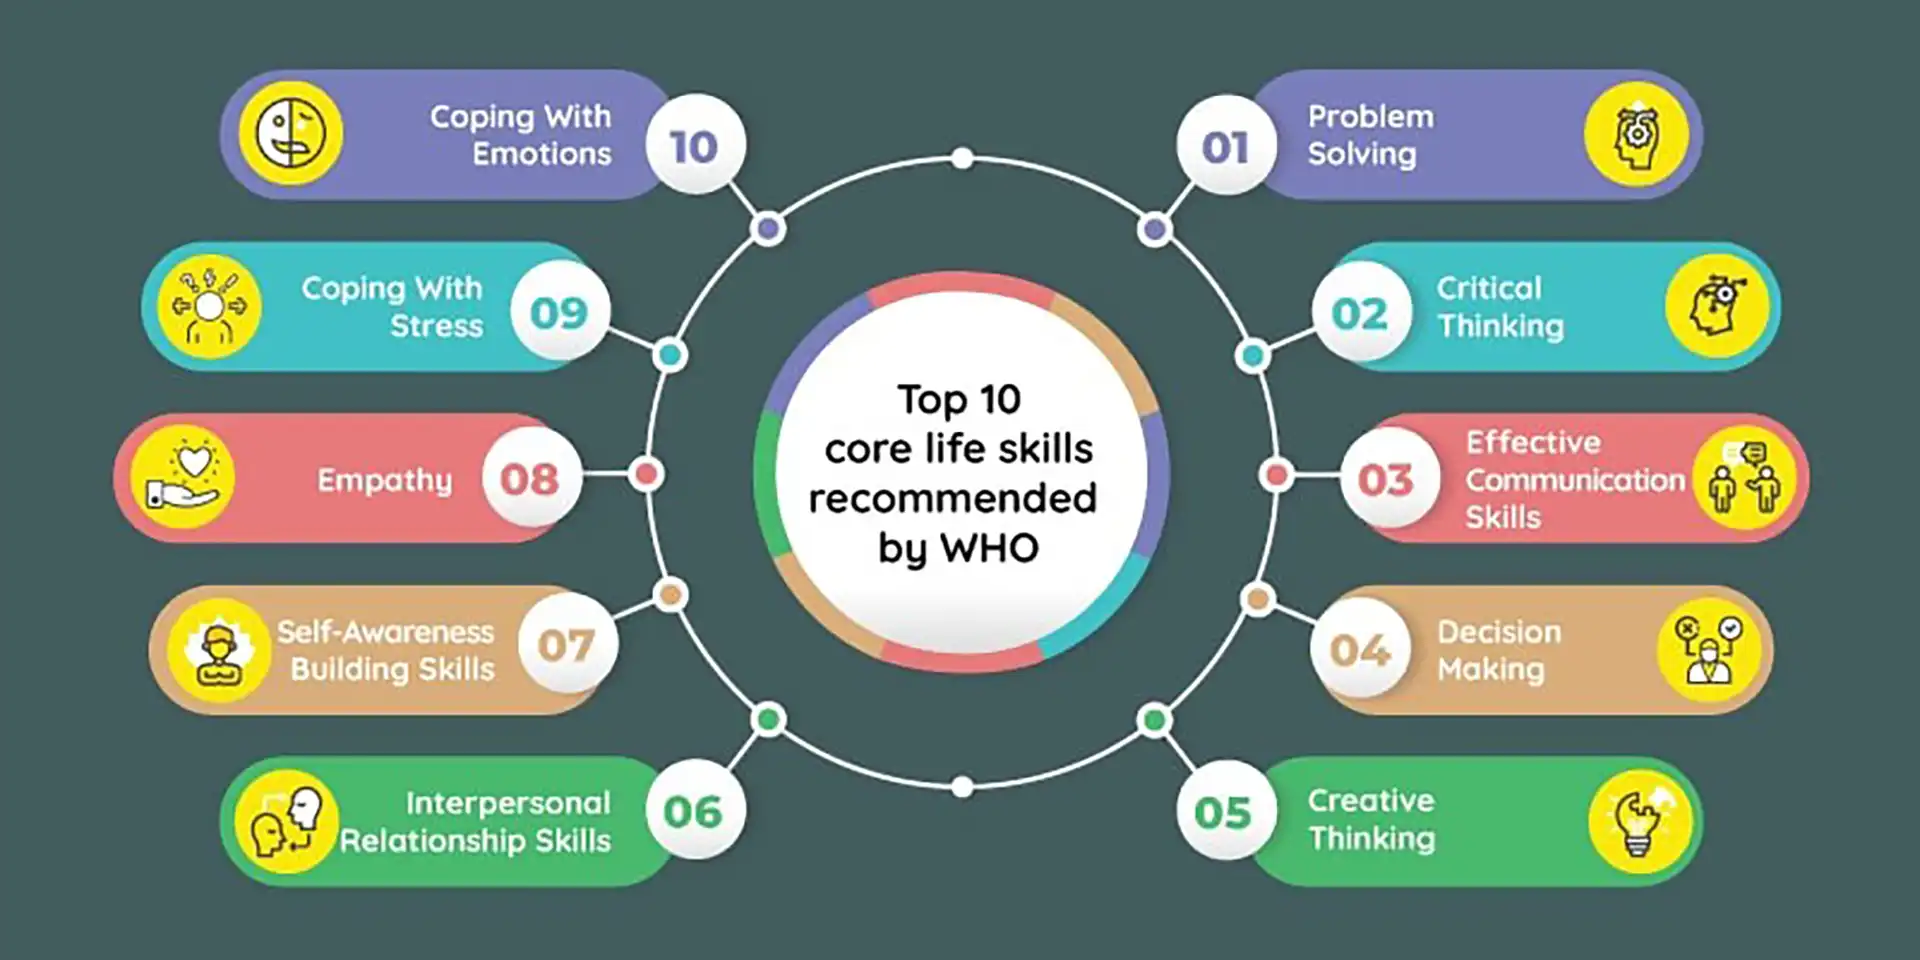 10 life skills from the perspective of WHO